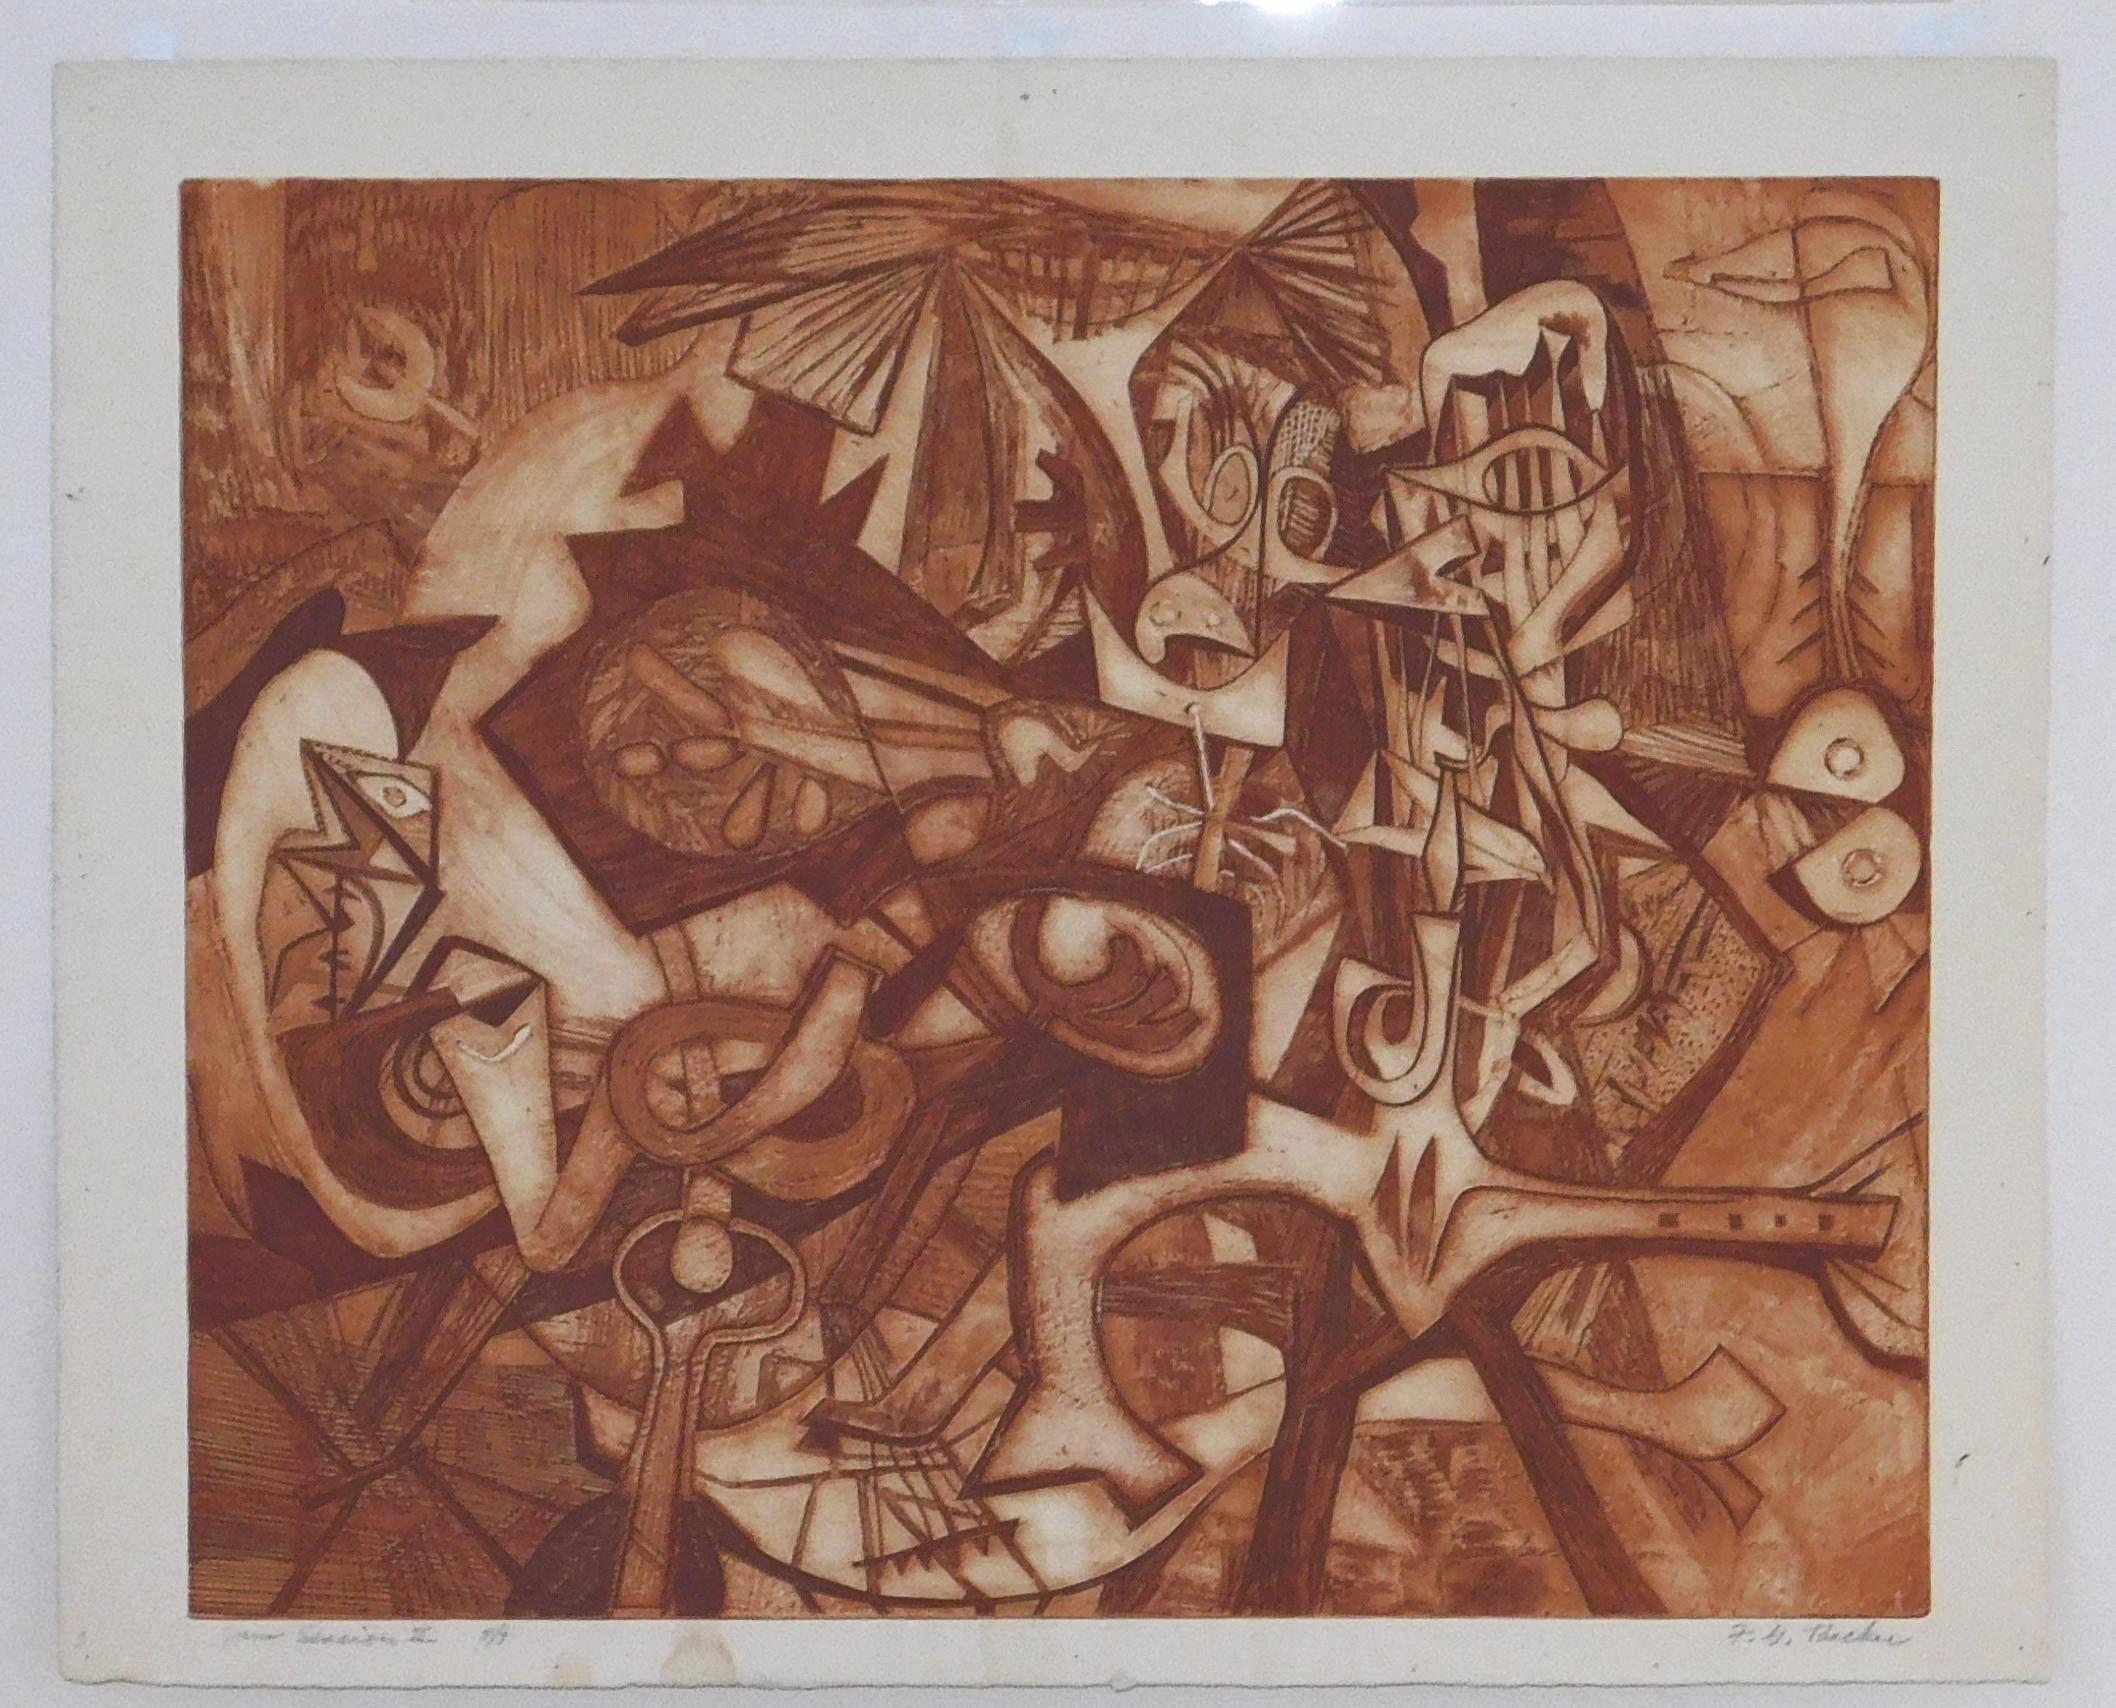 Wonderful abstract original etching in sepia ink by Frederick Becker (1913-2004).
The image measures 19 3/4